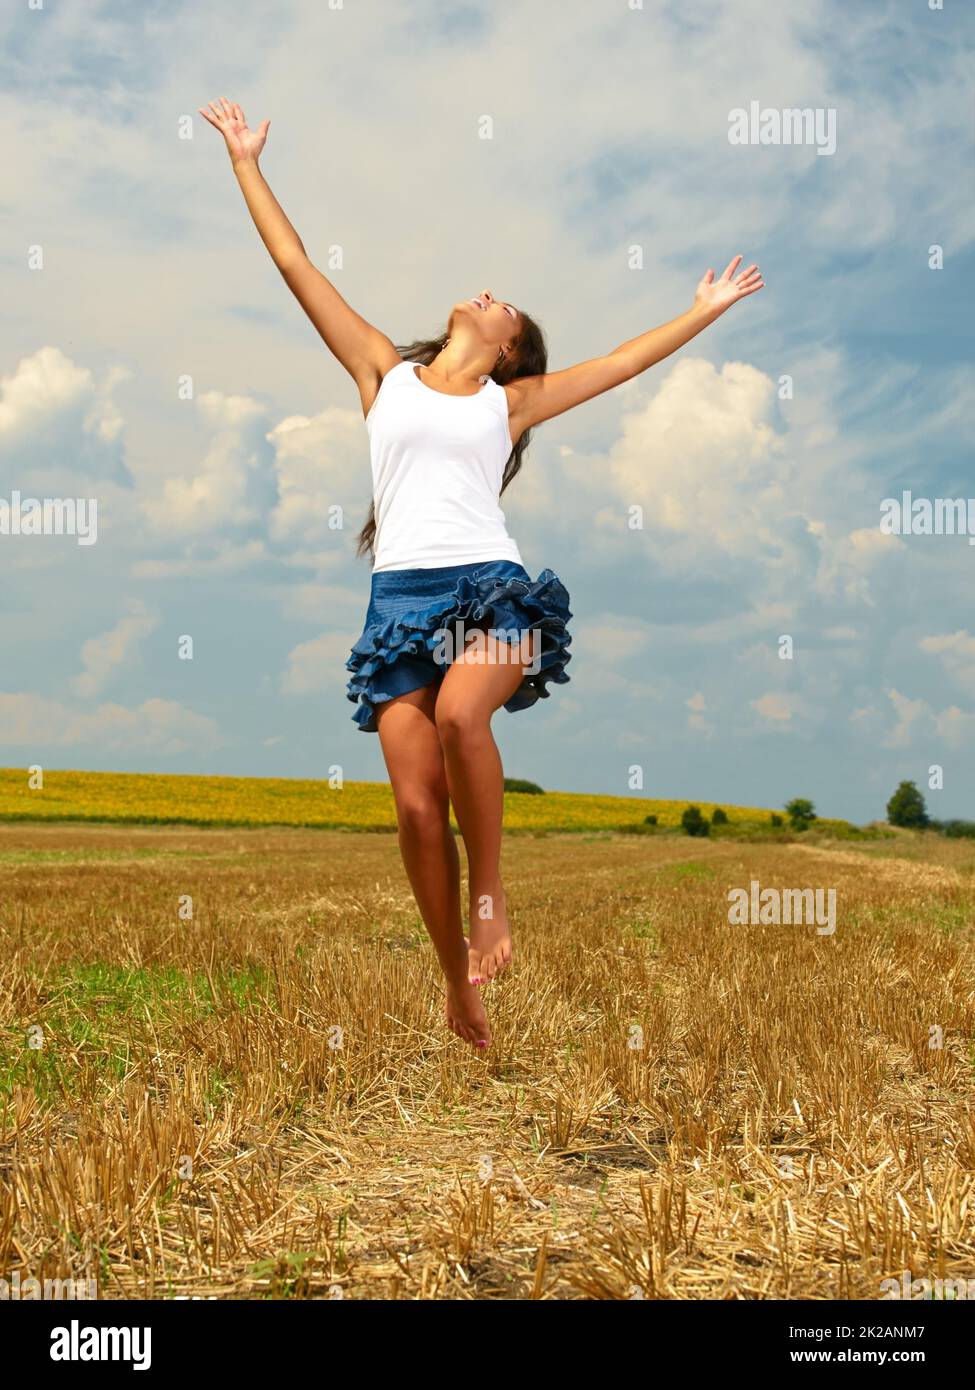 Its awesome to be alive. Shot of a beautiful young woman in the countryside with her arms outstretched in joy. Stock Photo